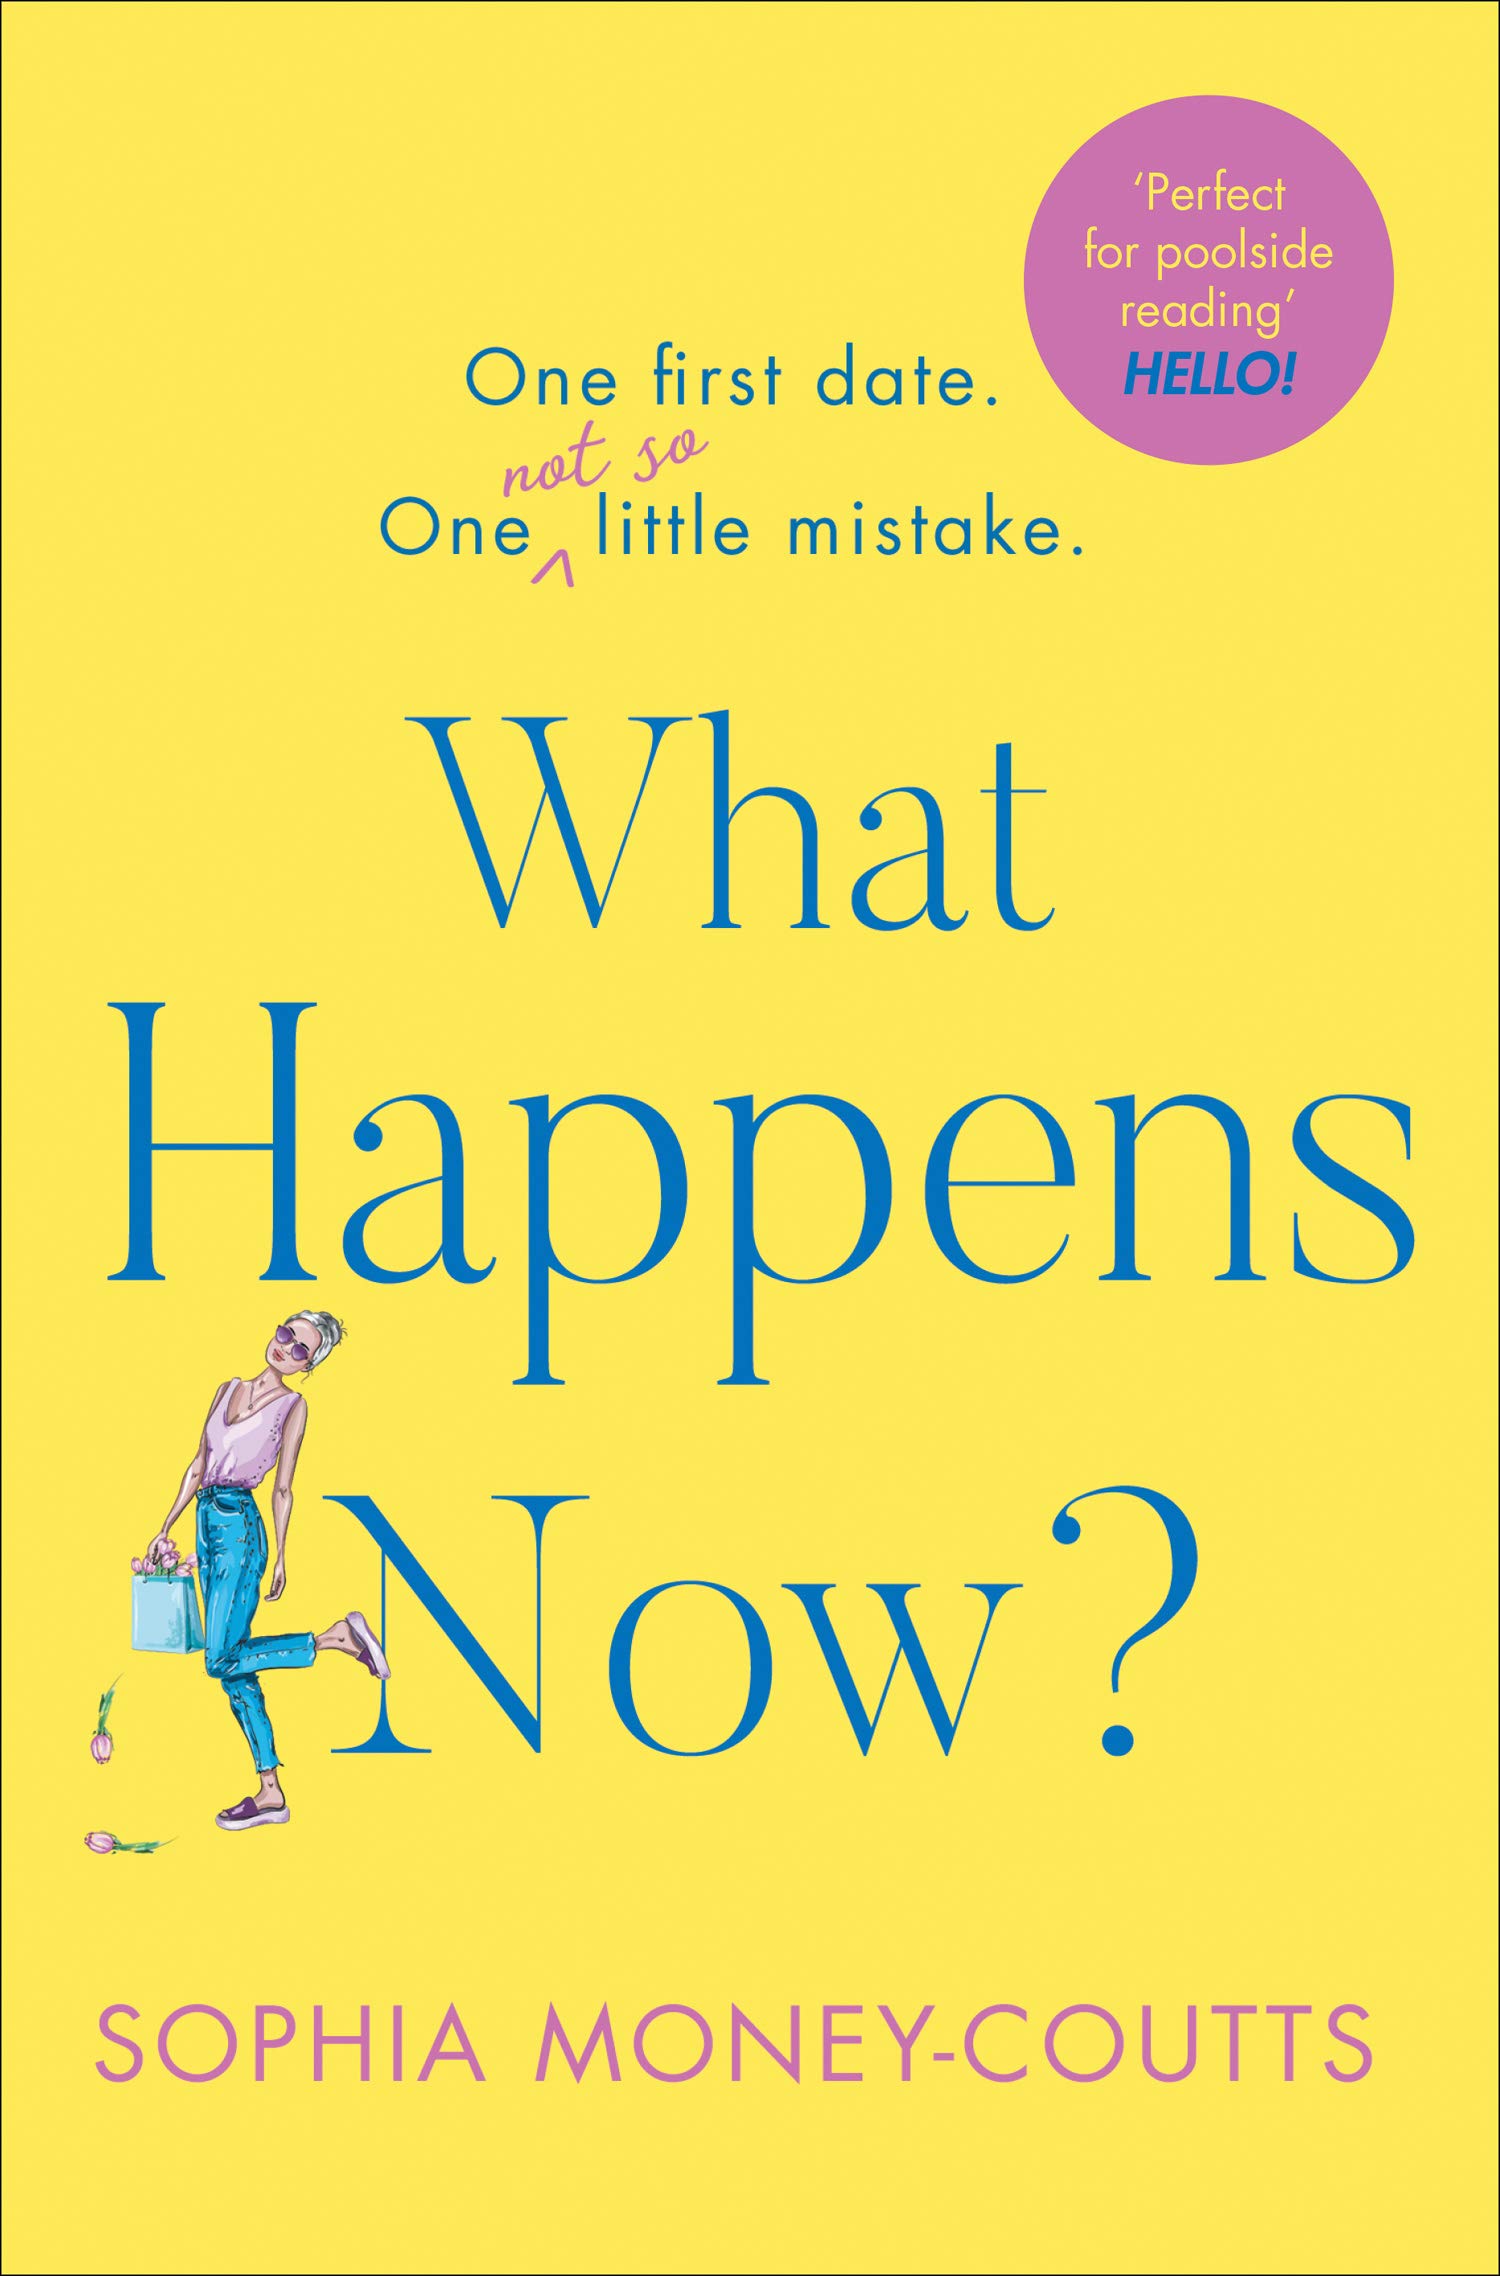 What Happens Now? By Sophia Money-Coutts